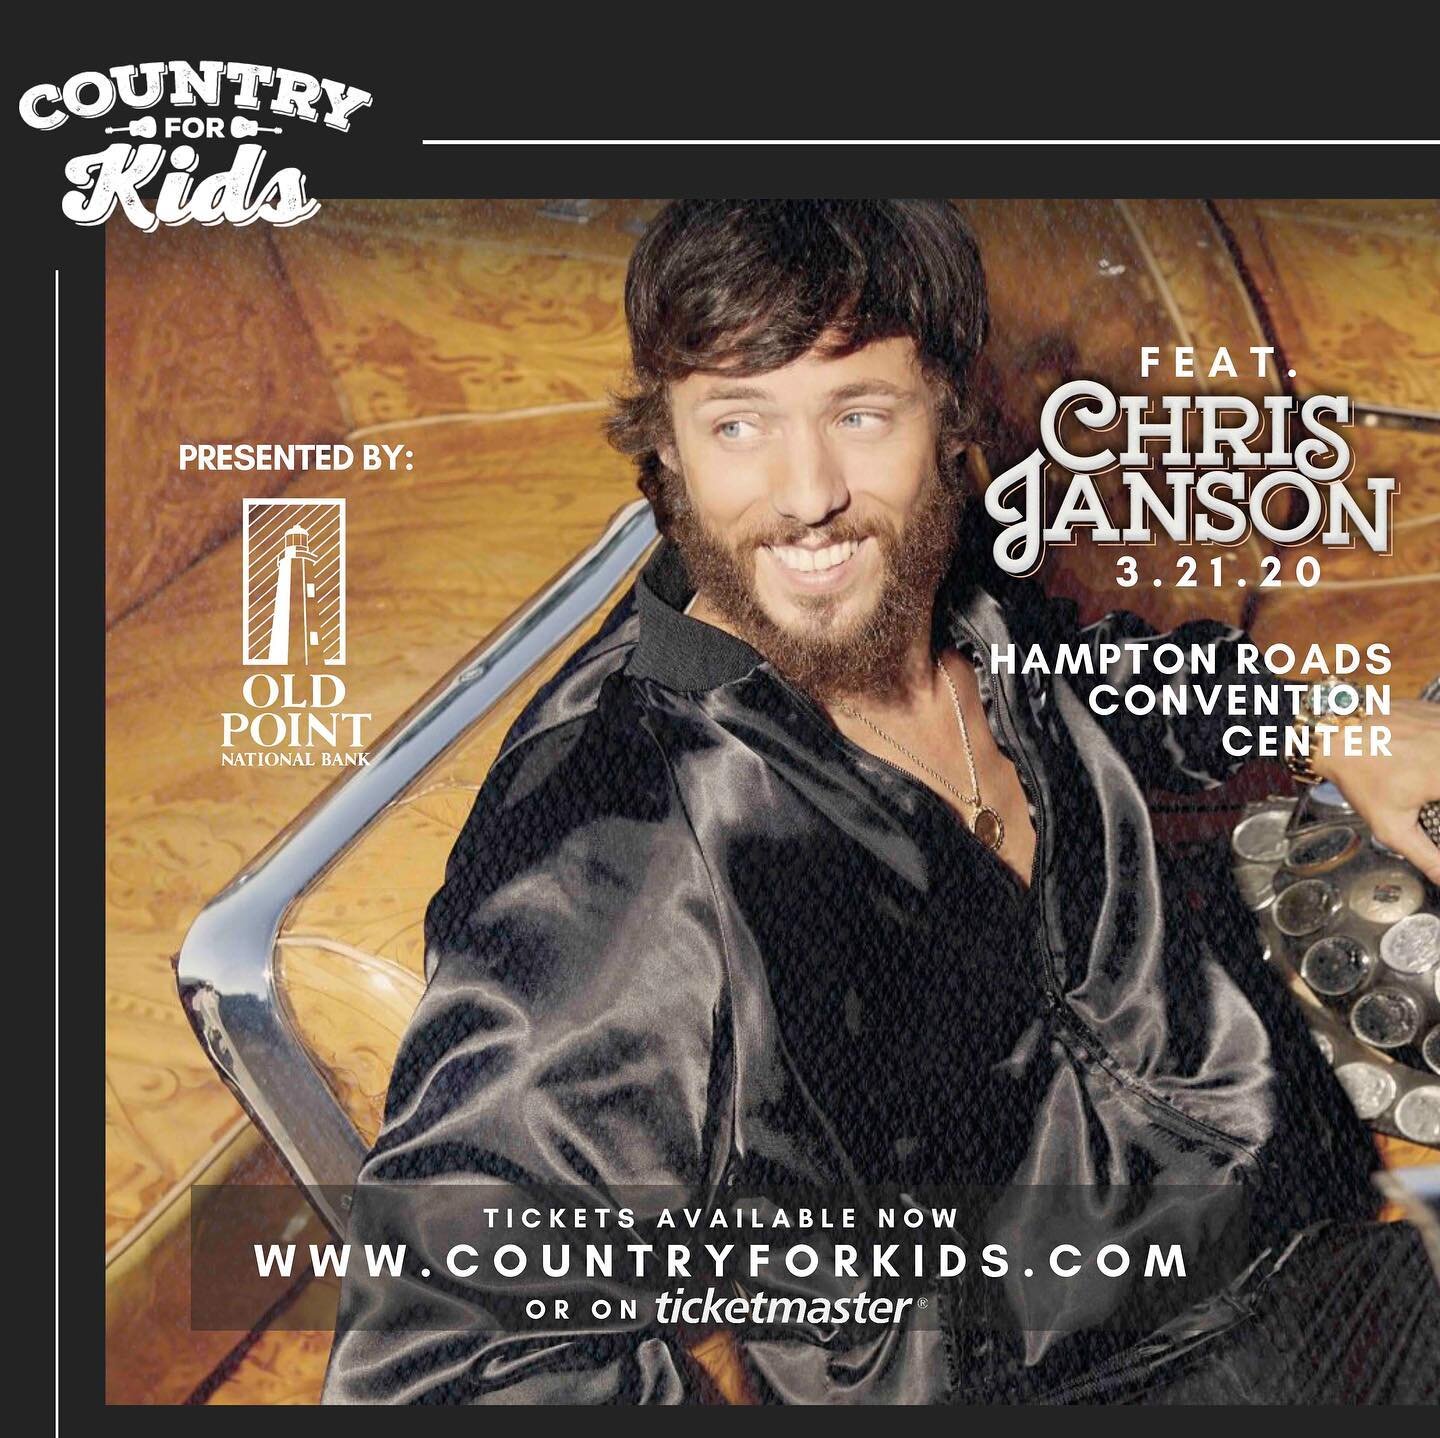 The countdown has started and we can't wait for @thechrisjanson  at @country4kids 2020 on March 21st!! Tickets available NOW at www.countryforkids.com 🎊